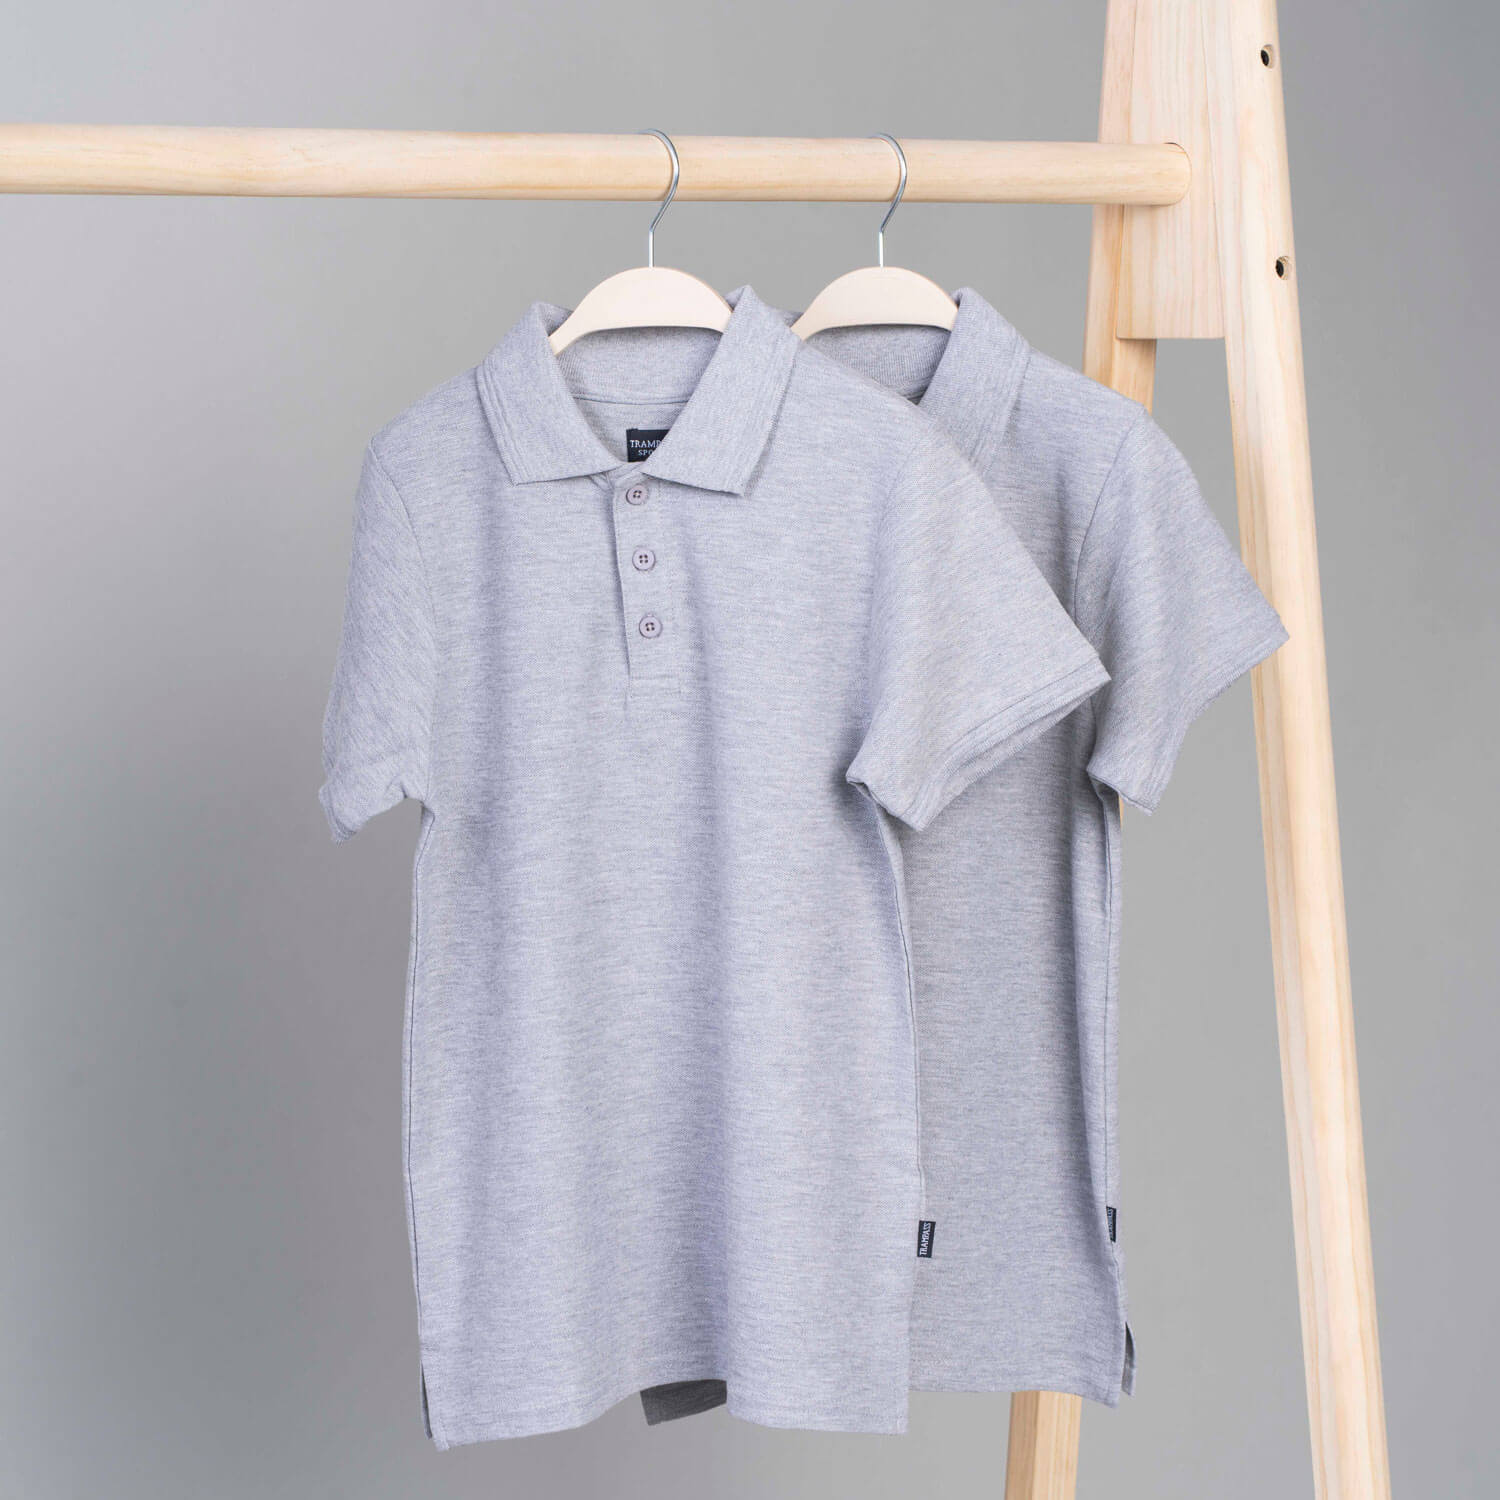 Skippy Short-Sleeve Polo Top 2 Pack - Grey 1 Shaws Department Stores